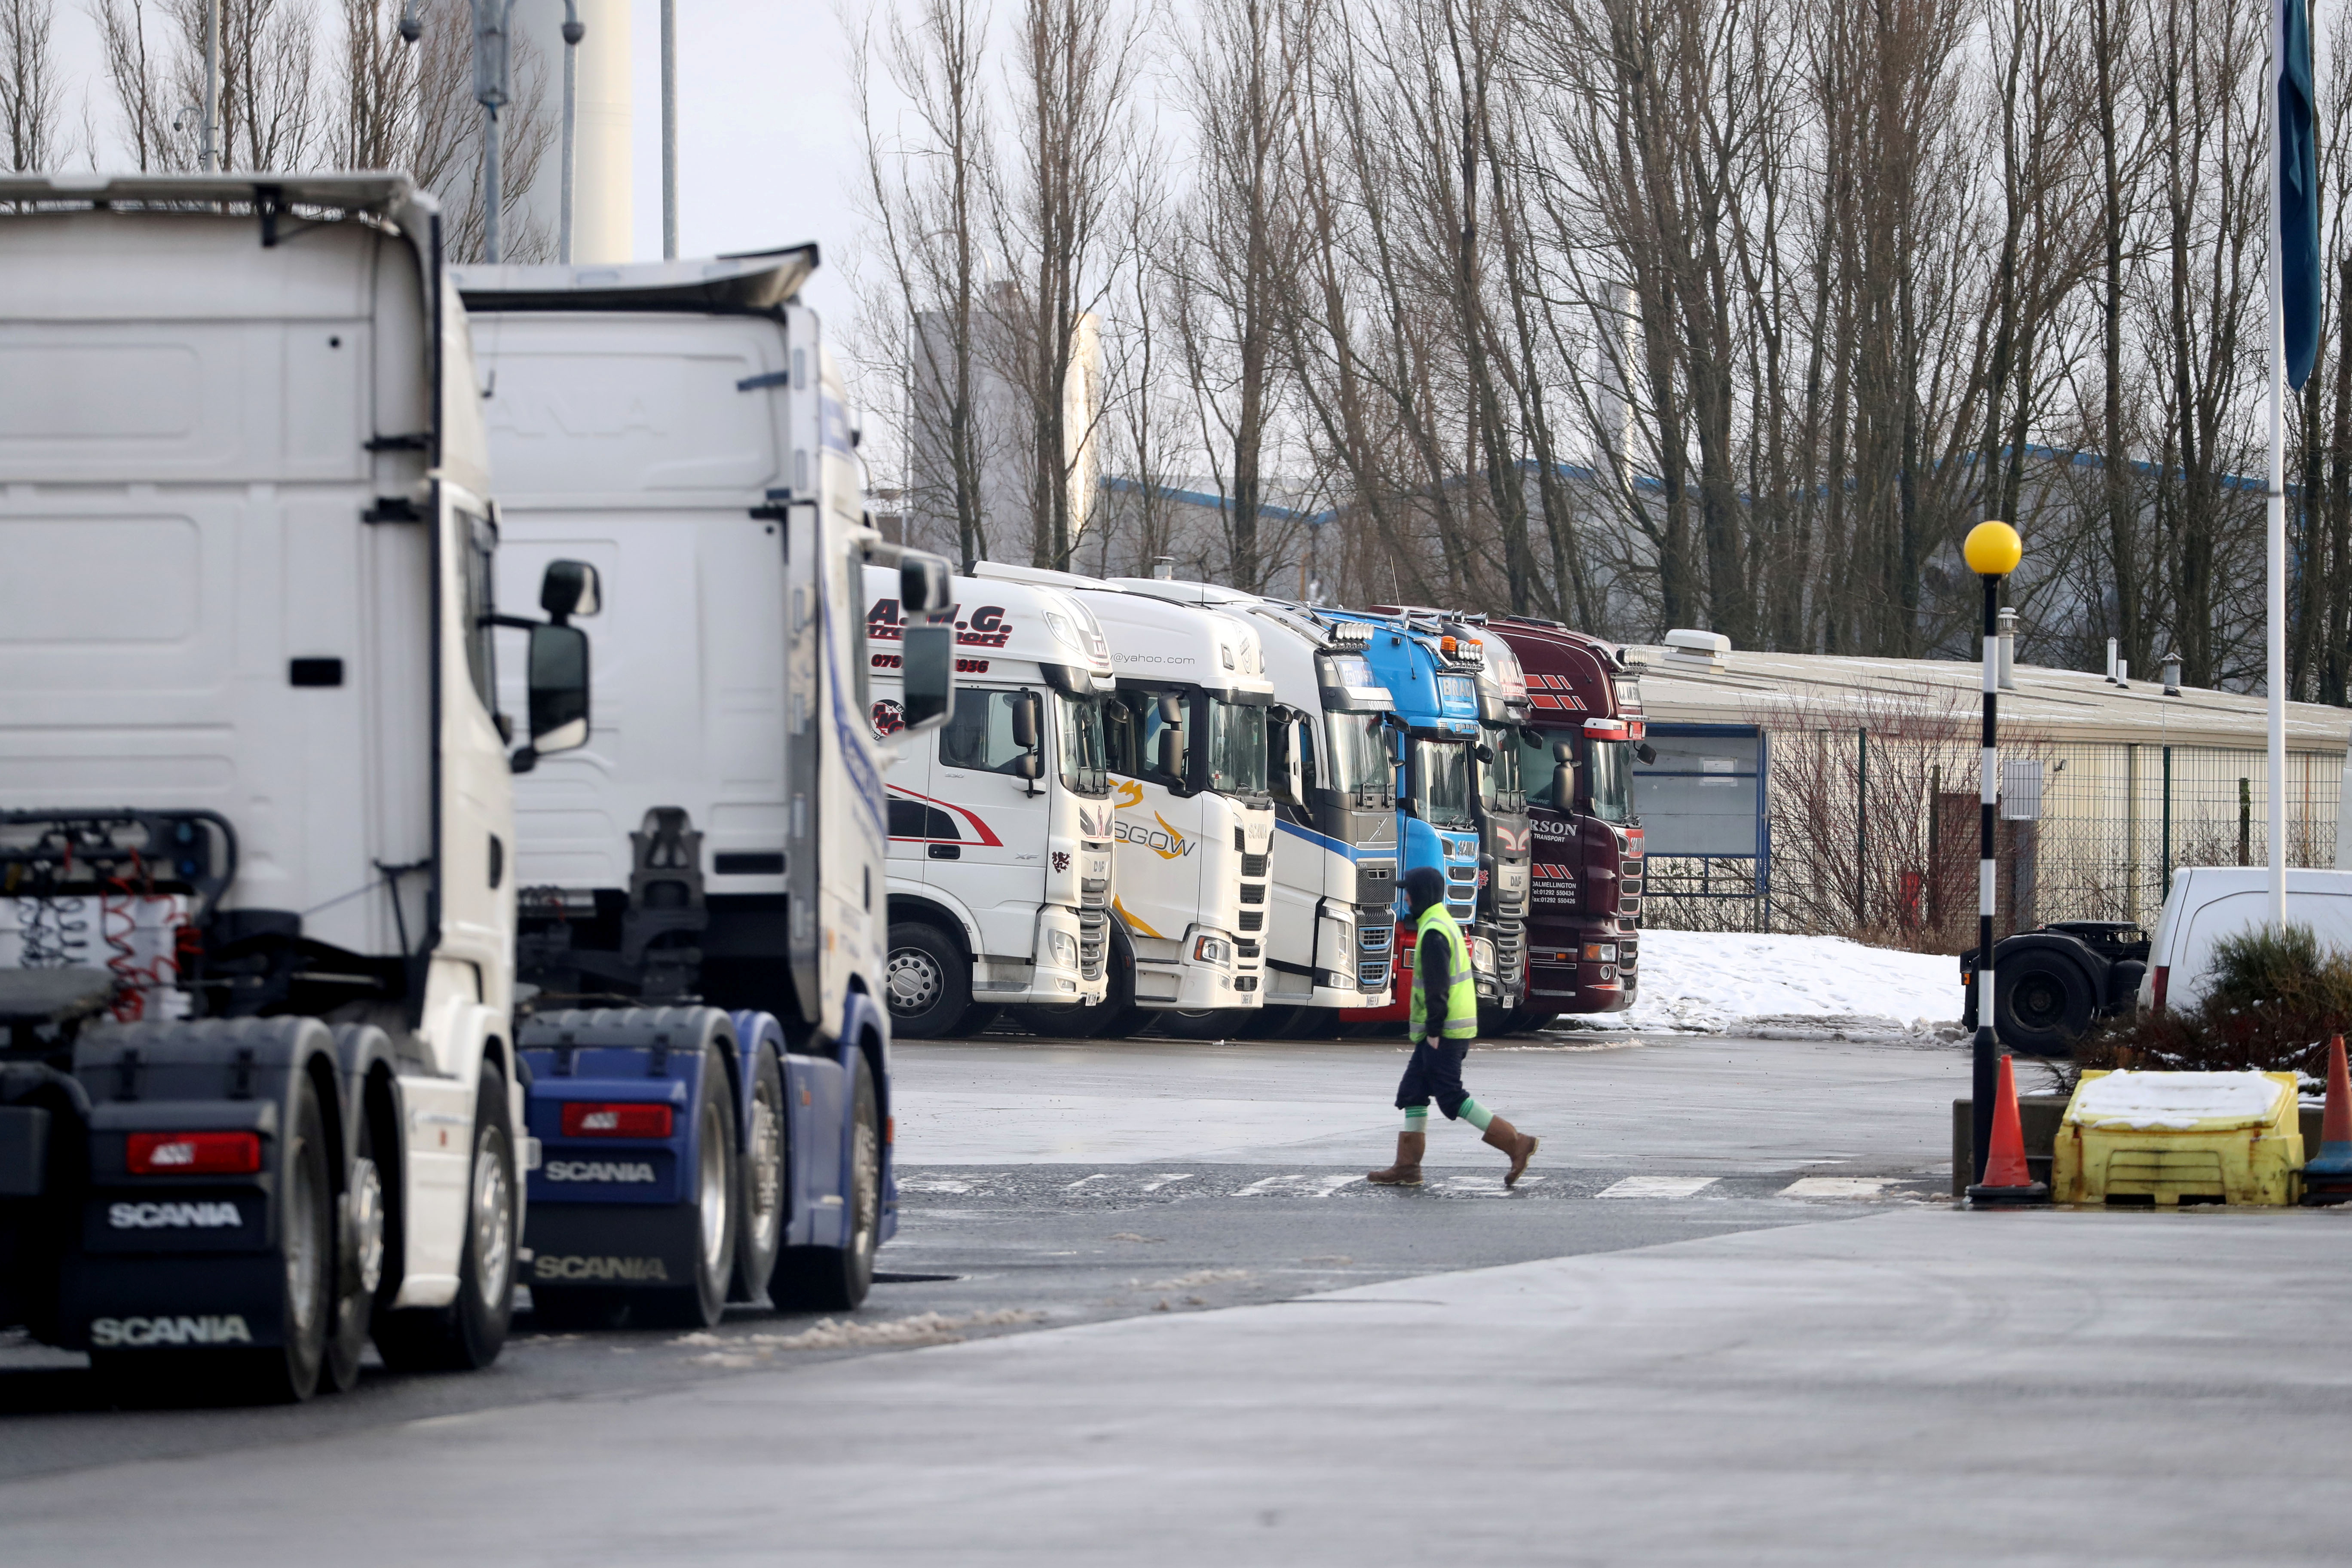 Trucks are parked at the DFDS warehouse facility in Larkhall